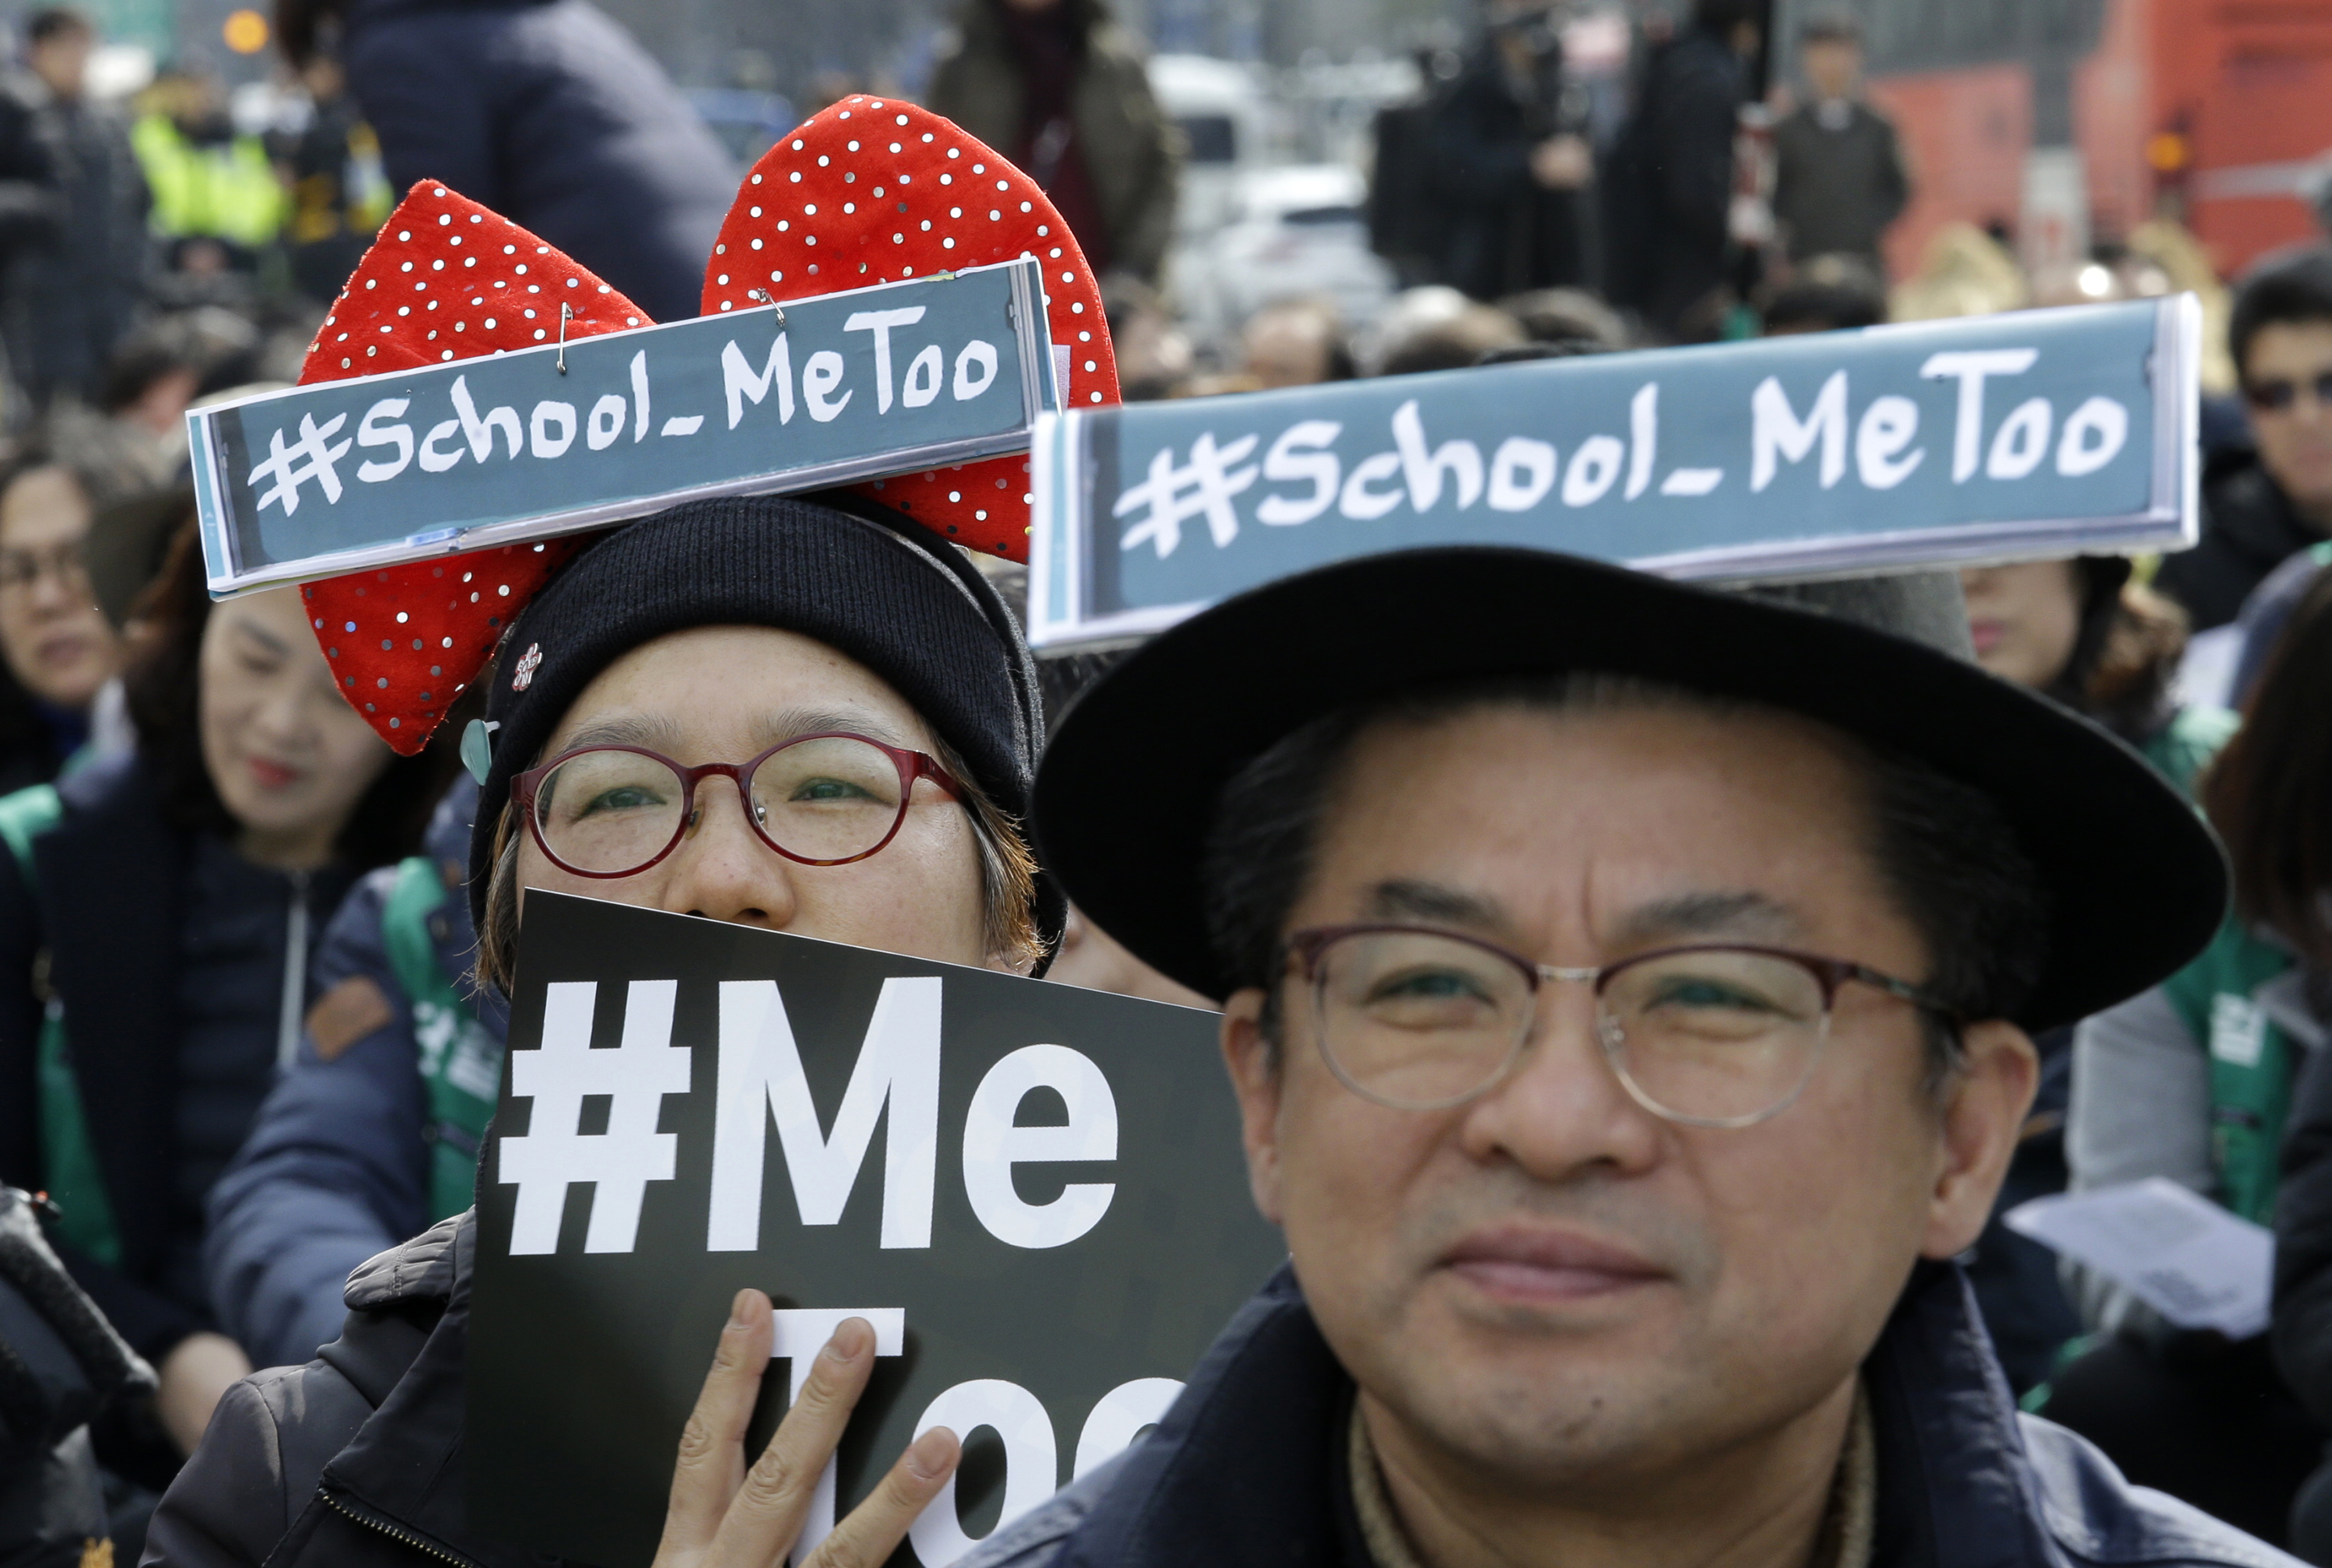 A female worker supporting the MeToo movement attends a rally to mark International Women's Day in Seoul, South Korea